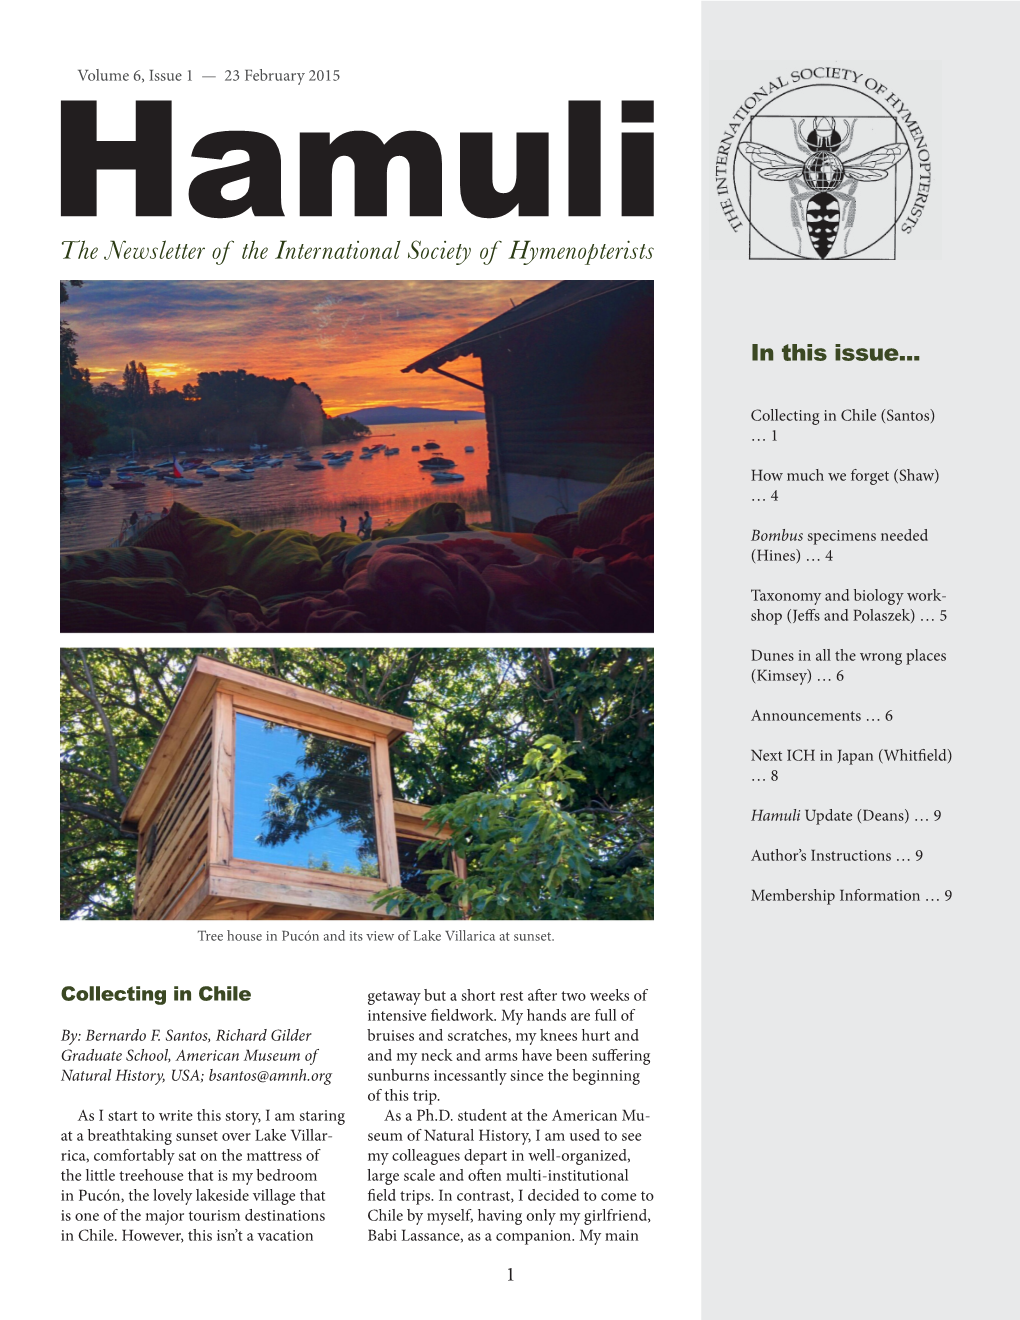 The Newsletter of the International Society of Hymenopterists